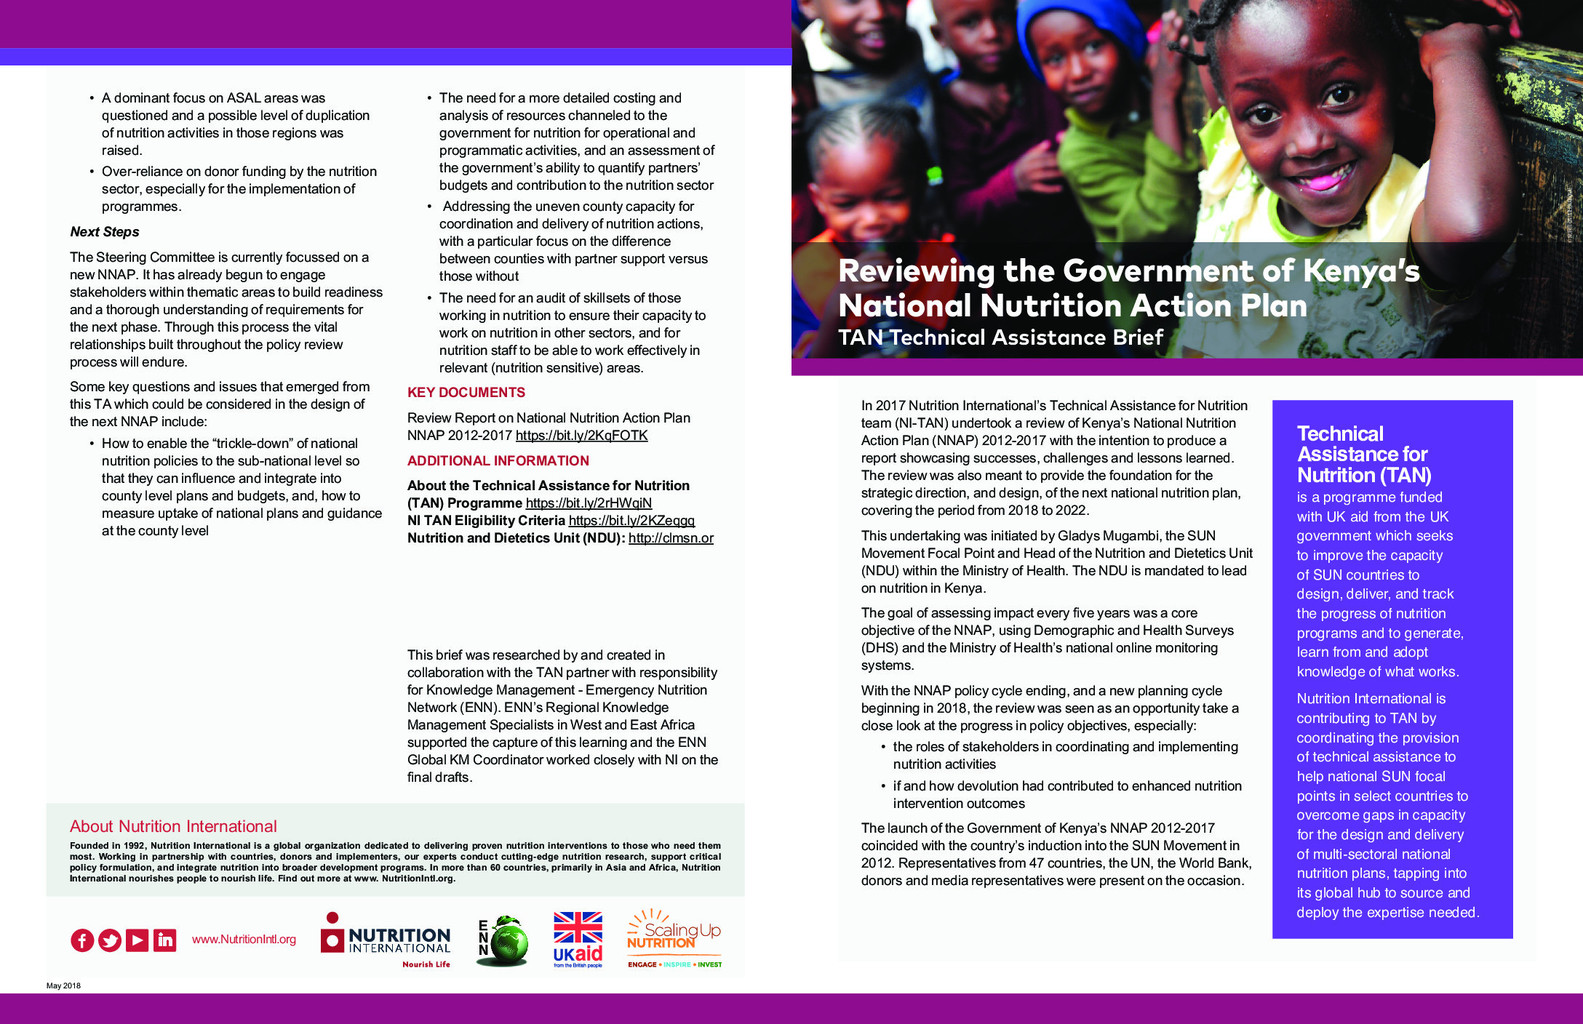 Reviewing the Government of Kenya’s National Nutrition Action Plan – TAN Technical Assistance Brief thumbnail